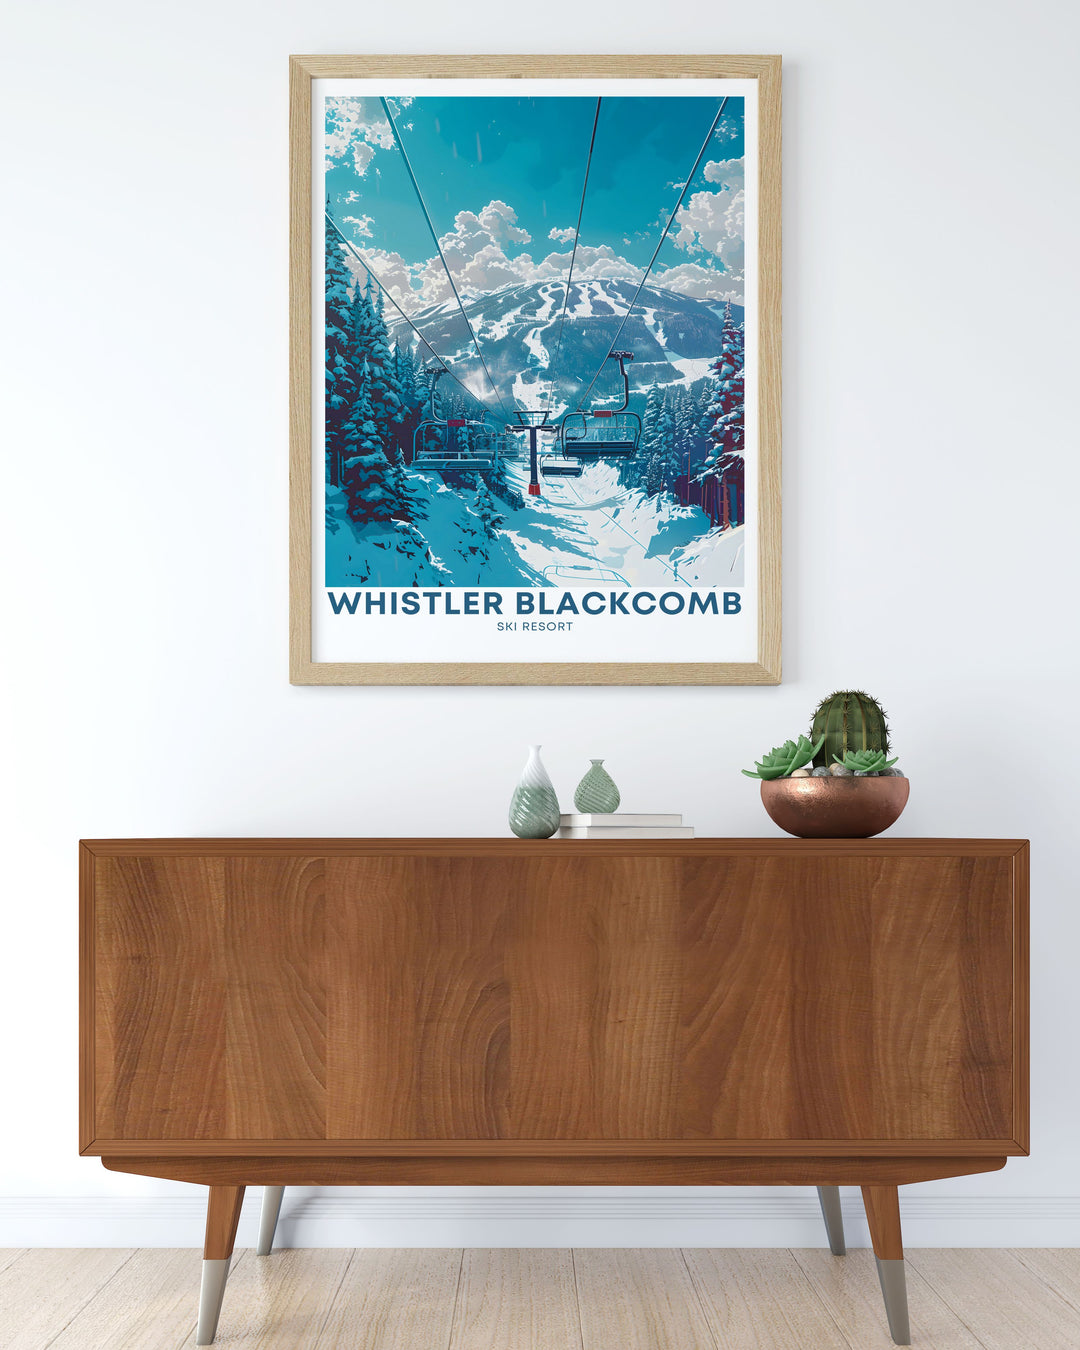 Whistler peak chair lifts prints showcasing the scenic lift rides at Whistler Blackcomb, ideal for home decor and gifts for skiing and snowboarding enthusiasts who admire Whistler Canadas winter landscape.